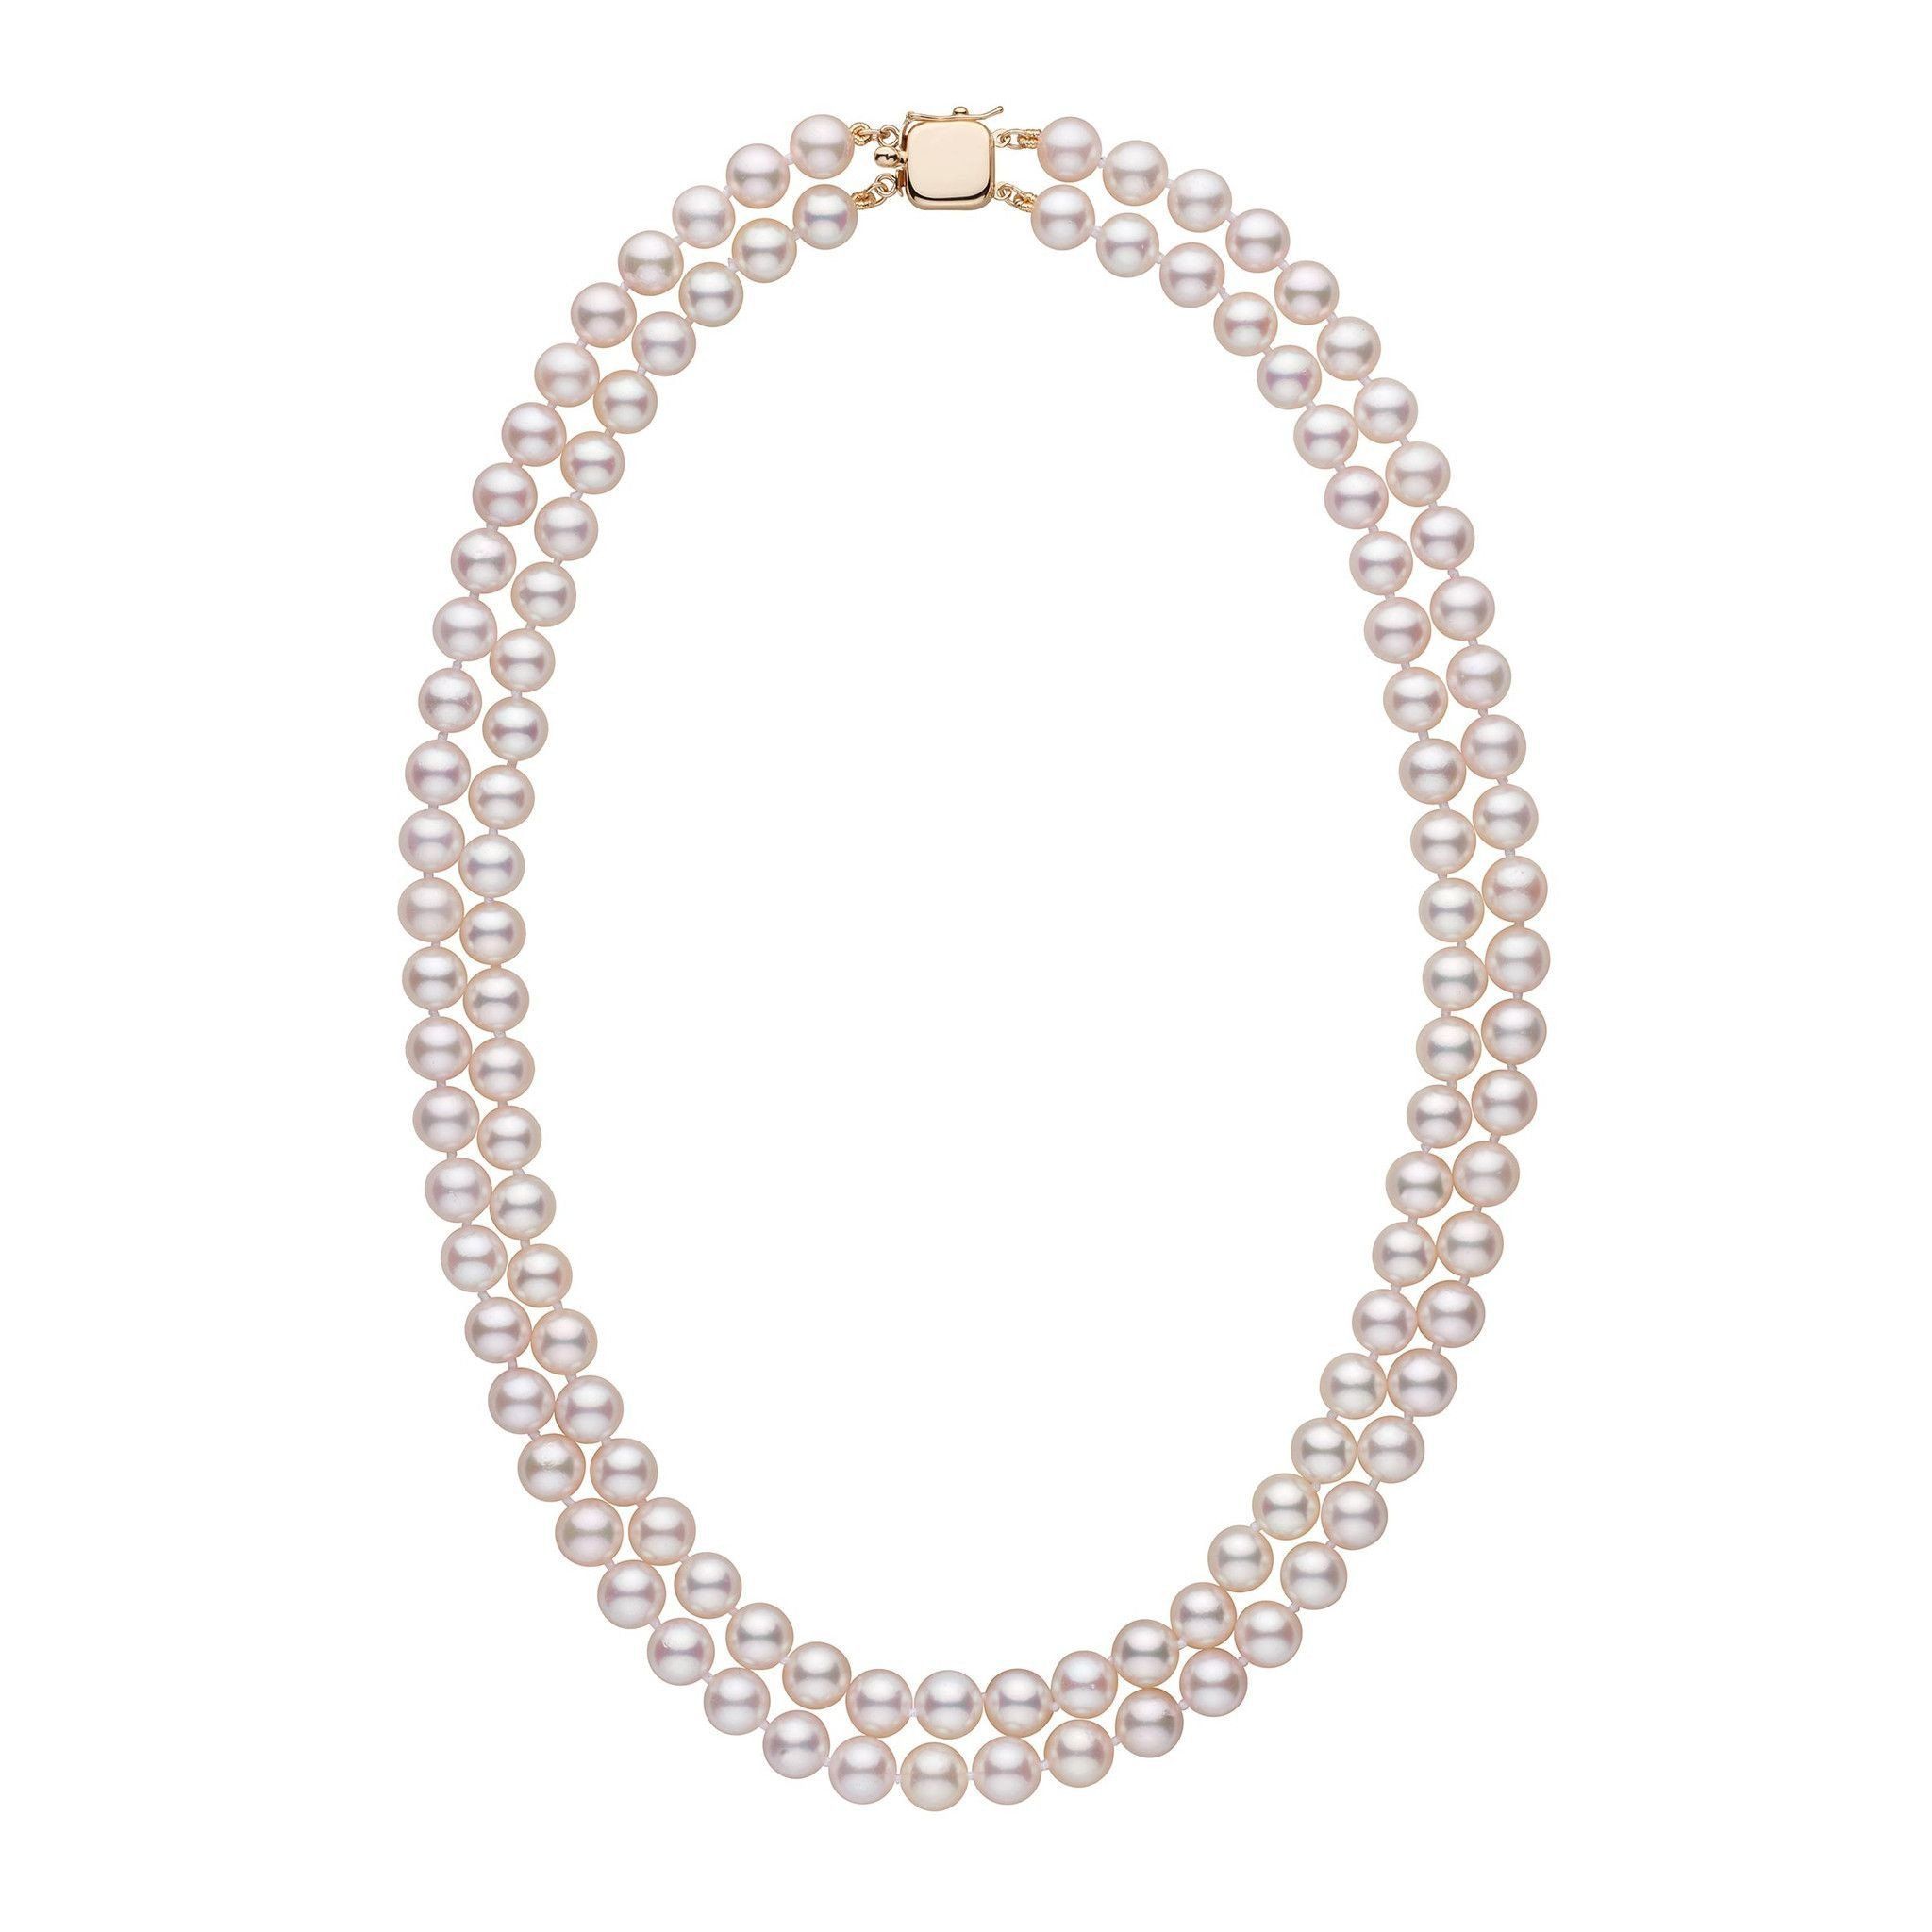 7.0-7.5 mm 18-inch AAA Double-Strand White Akoya Pearl Necklace Yellow Gold